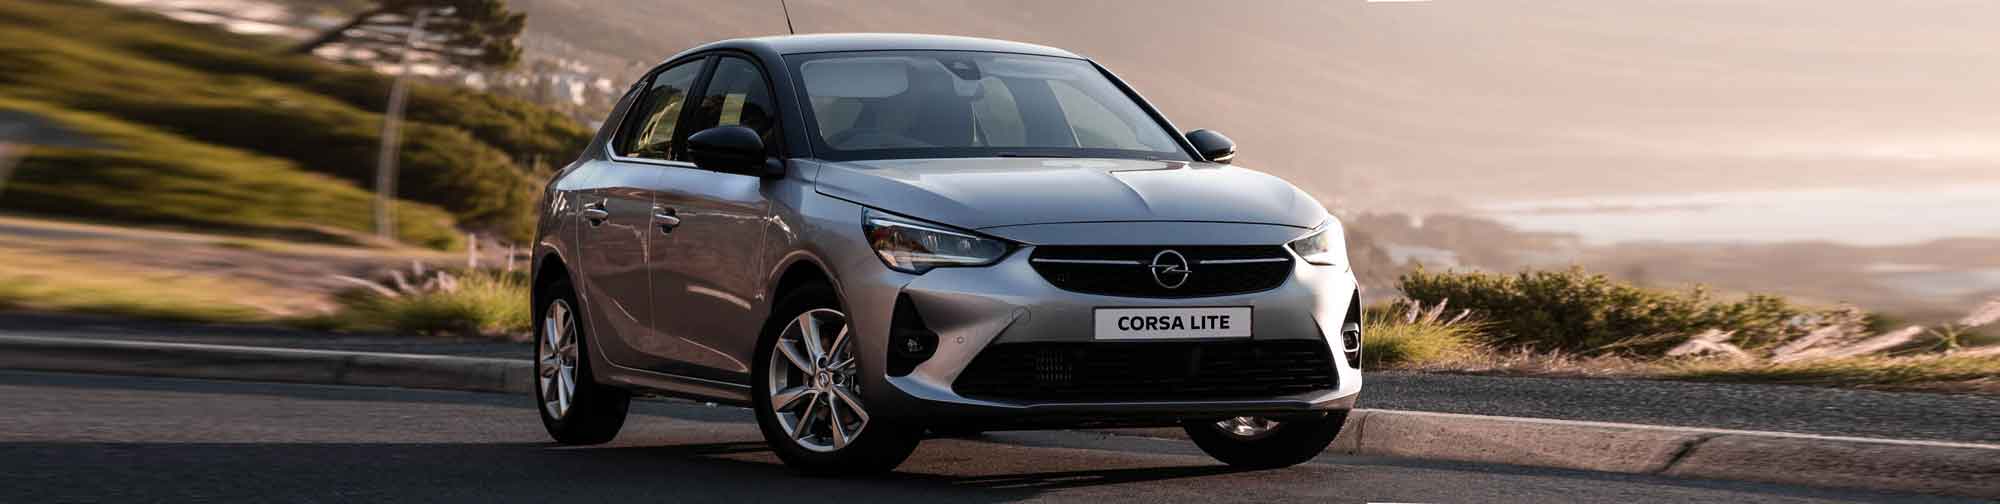 Opel adds value for money Corsa Lite to offering